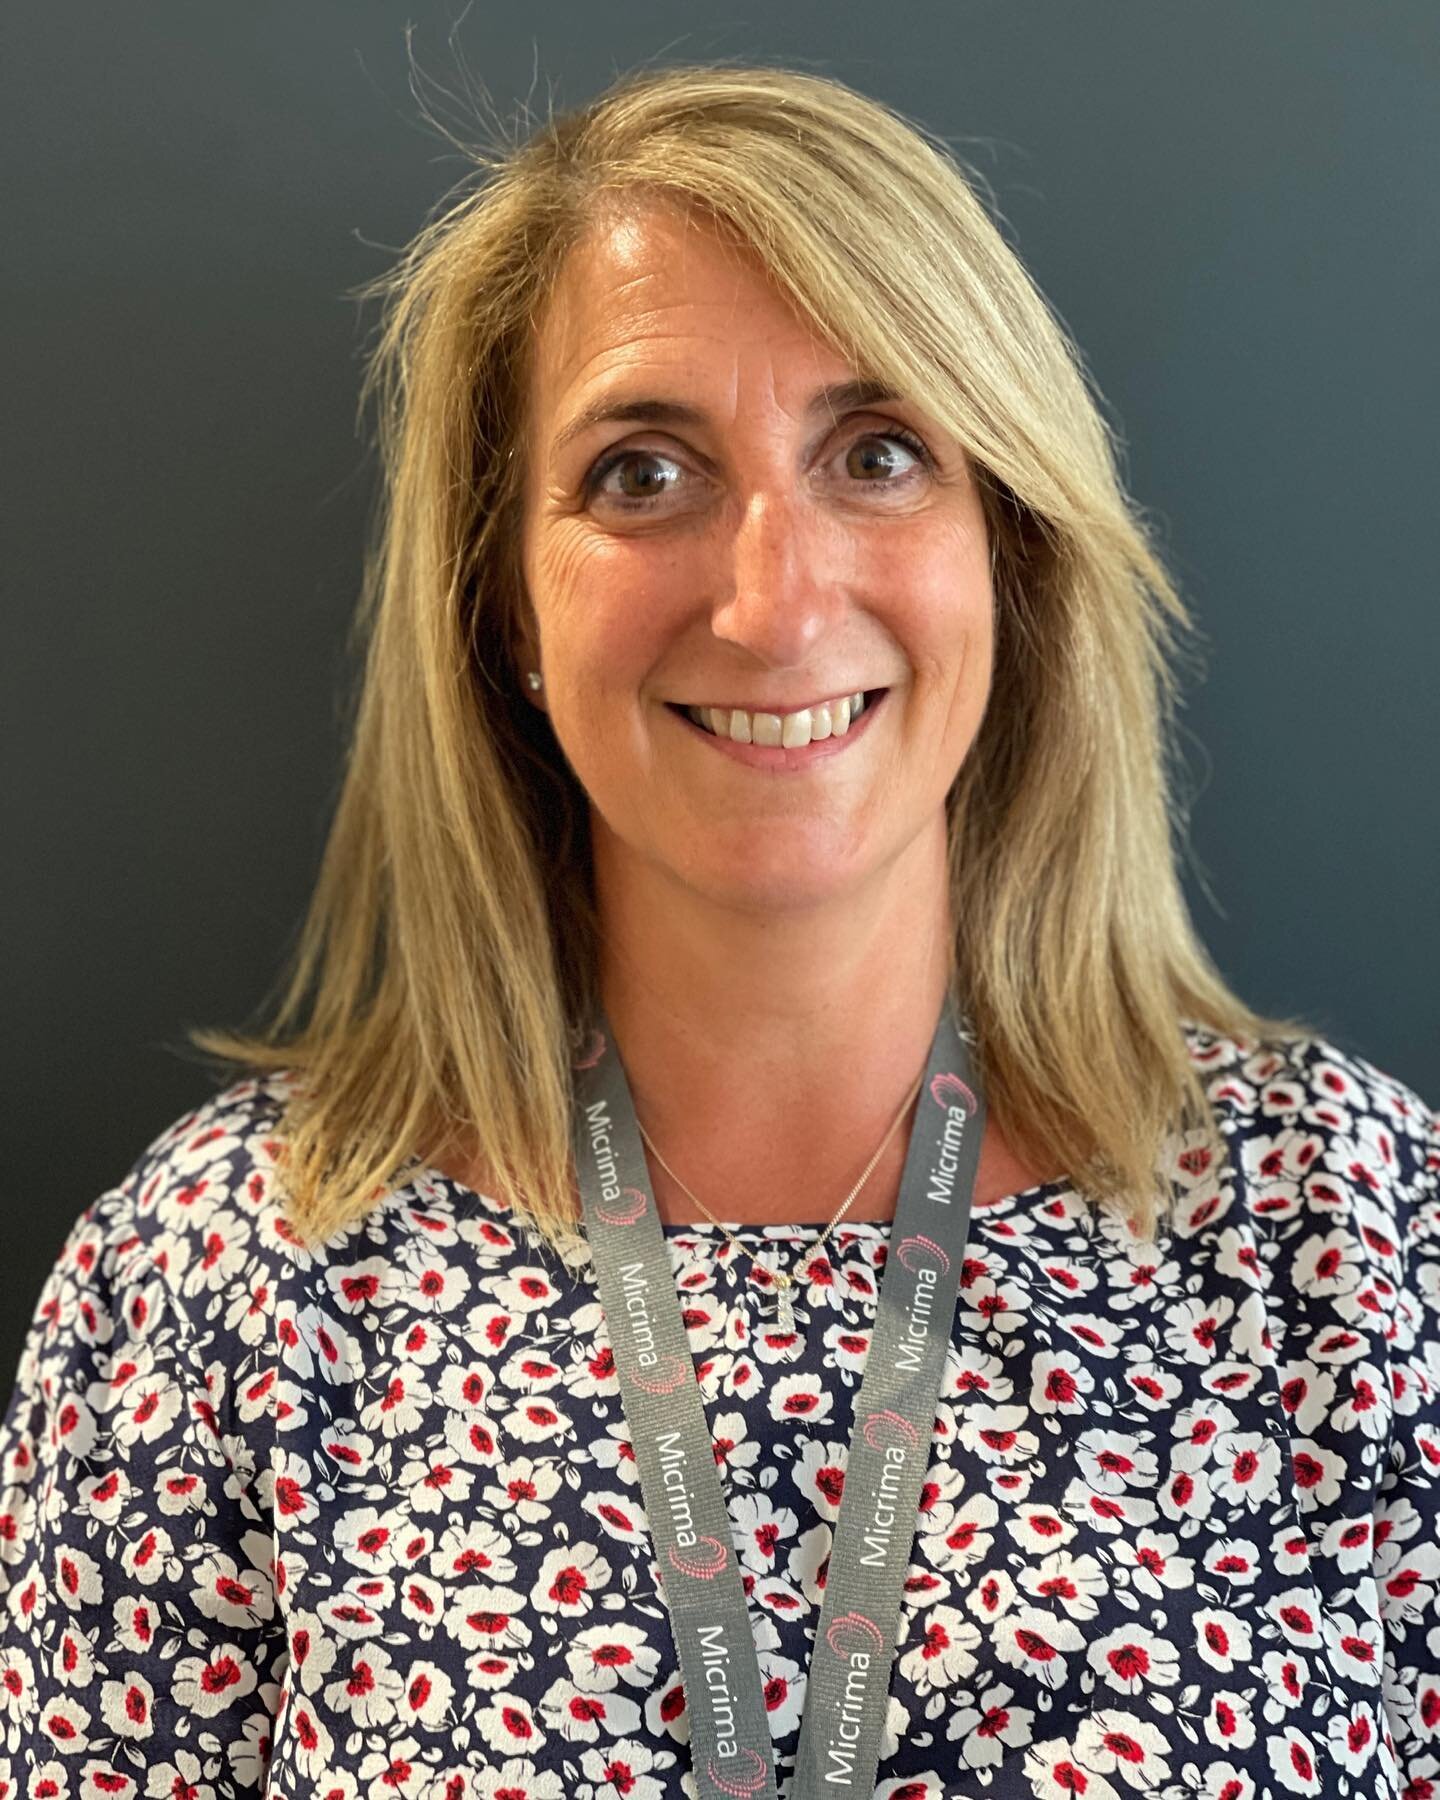 Welcoming Emma Jackson to the team as our new Clinical Affairs Manager!
 
Having qualified as a radiographer in 1991, Emma moved into Breast Imaging and worked in the NHS Breast Screening Programme until joining GE Healthcare in 2006 as Mammography C